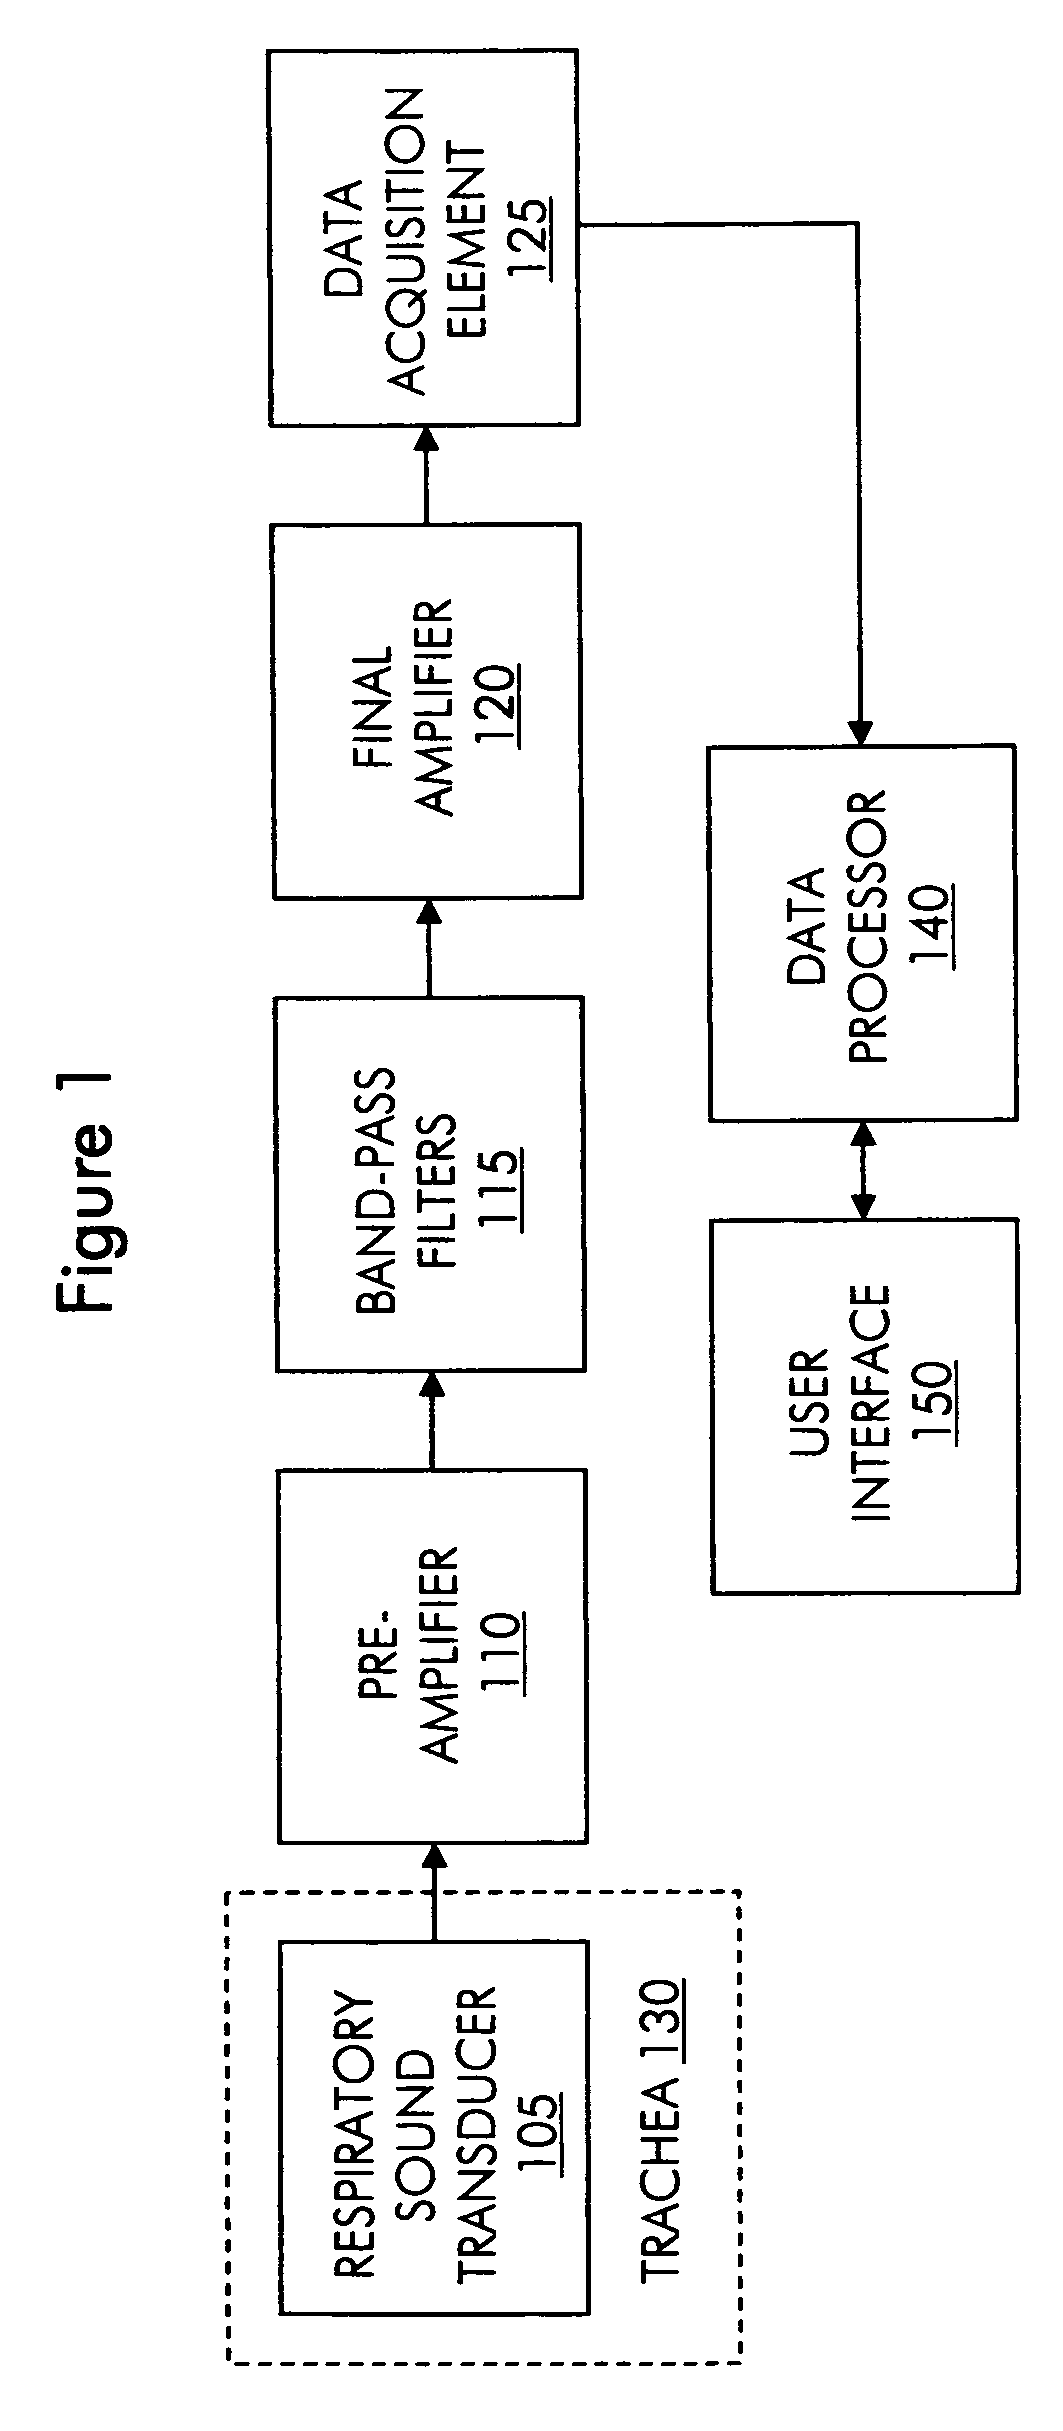 Method and system for respiratory phase classification using explicit labeling with label verification